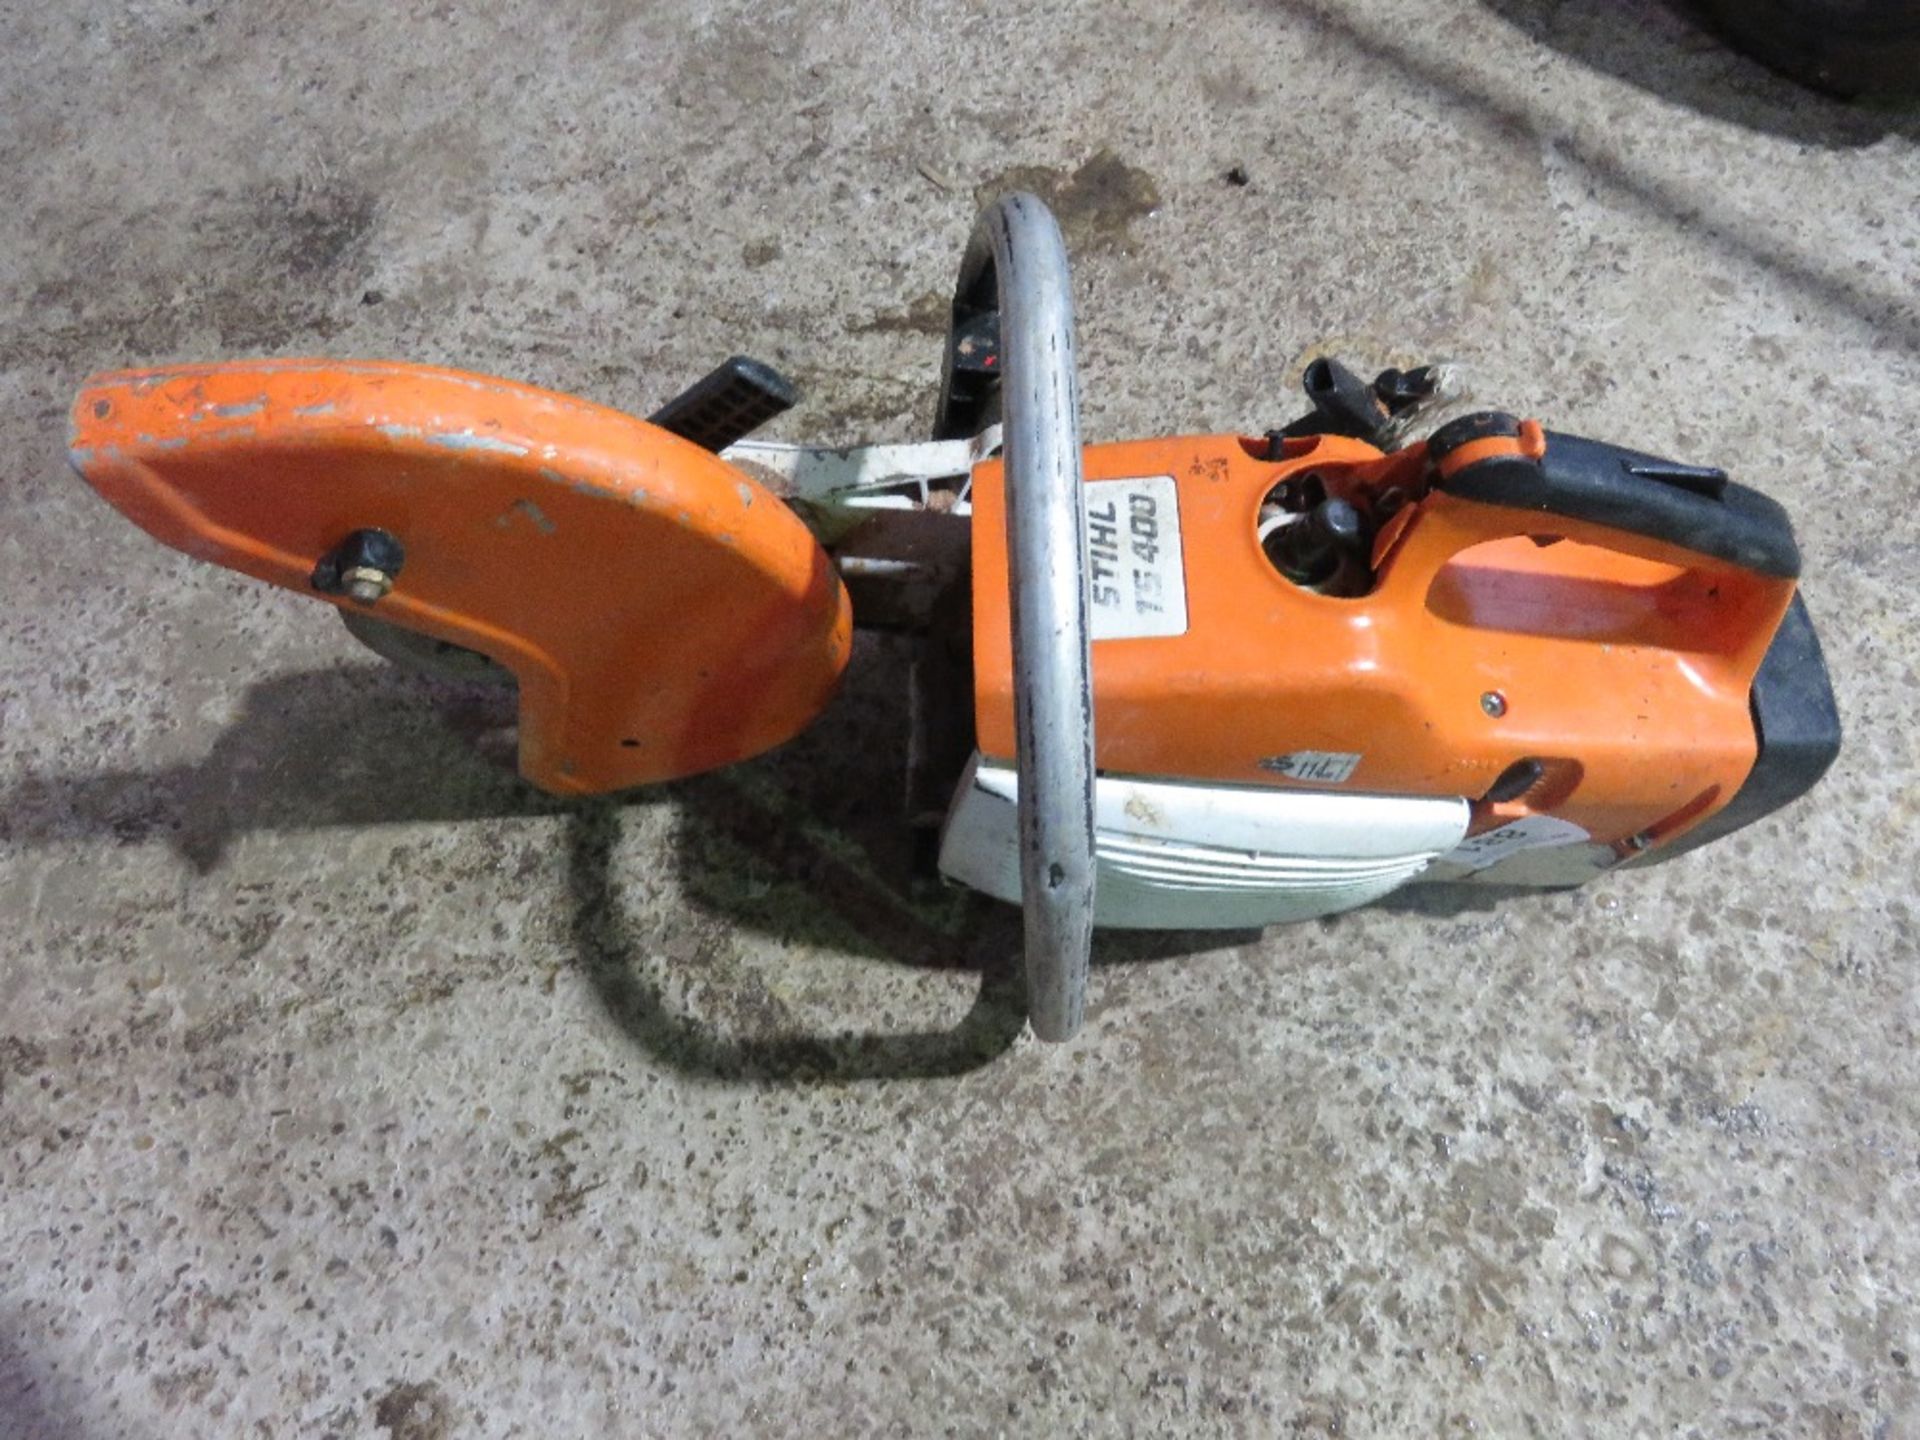 STIHL TS400 PETROL ENGINED CUT OFF SAW. THIS LOT IS SOLD UNDER THE AUCTIONEERS MARGIN SCHEME, THE - Image 3 of 3